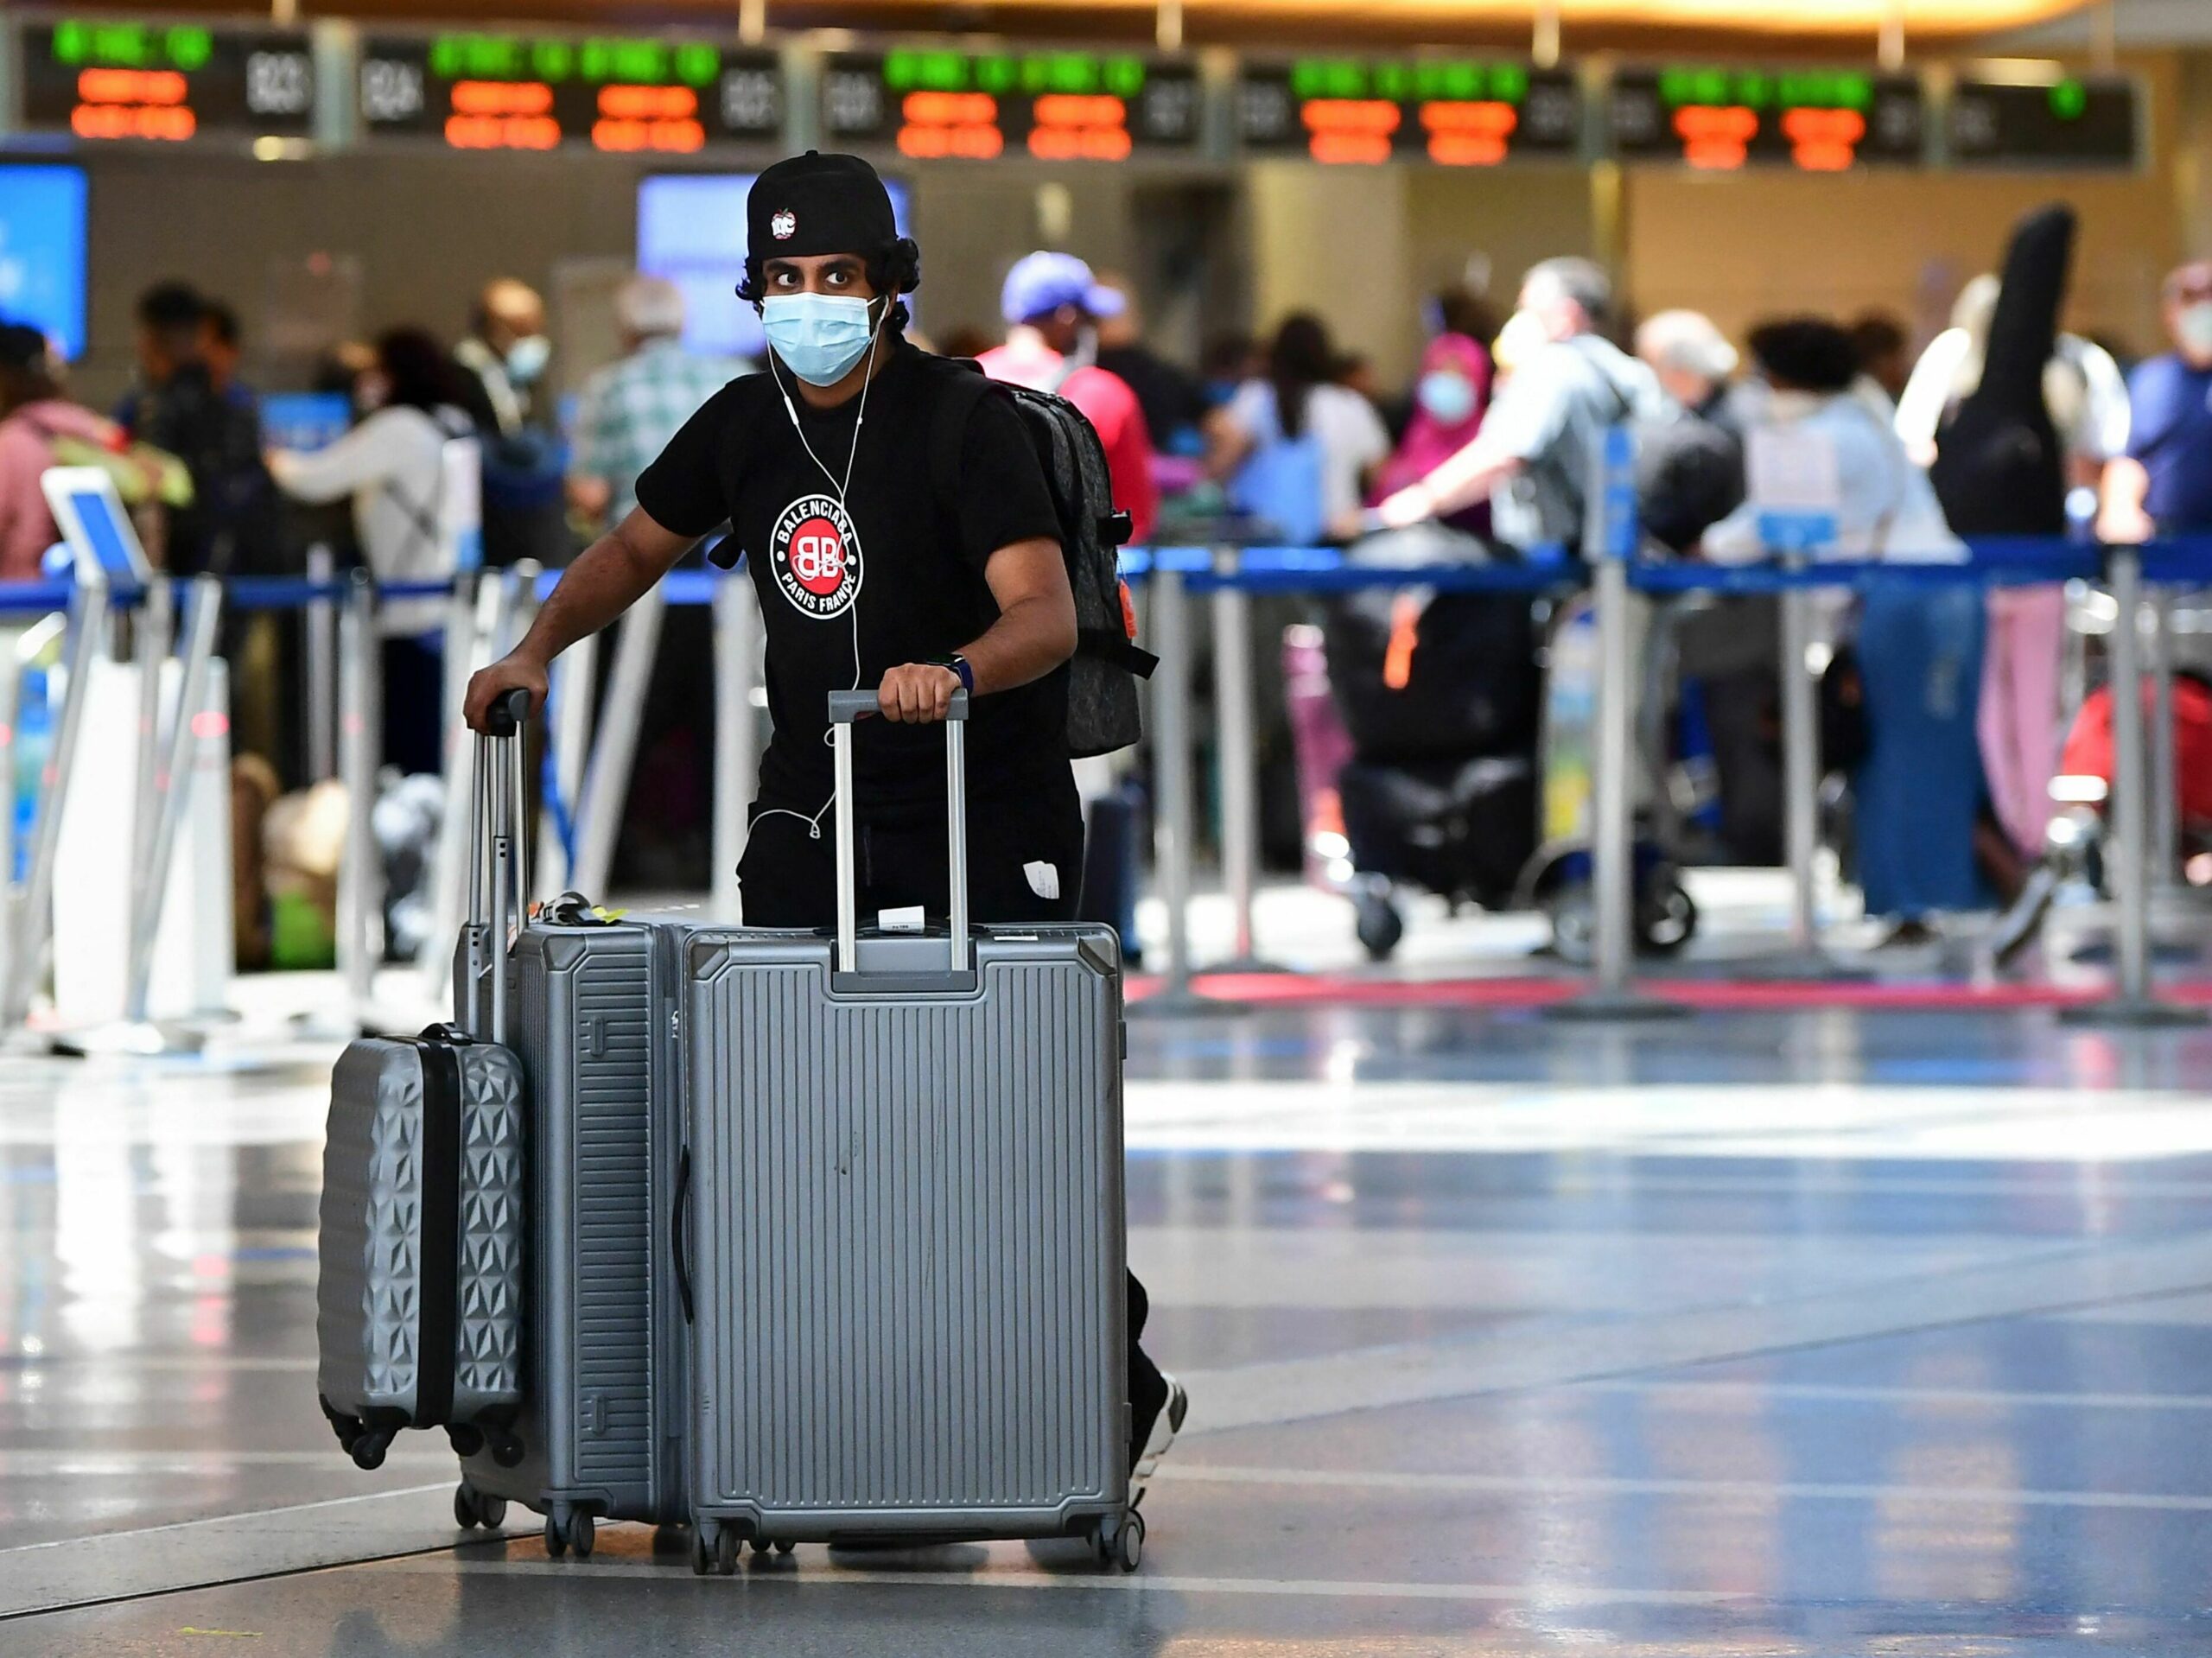 a man pushes his suitcases, wearing a mask, in the airport